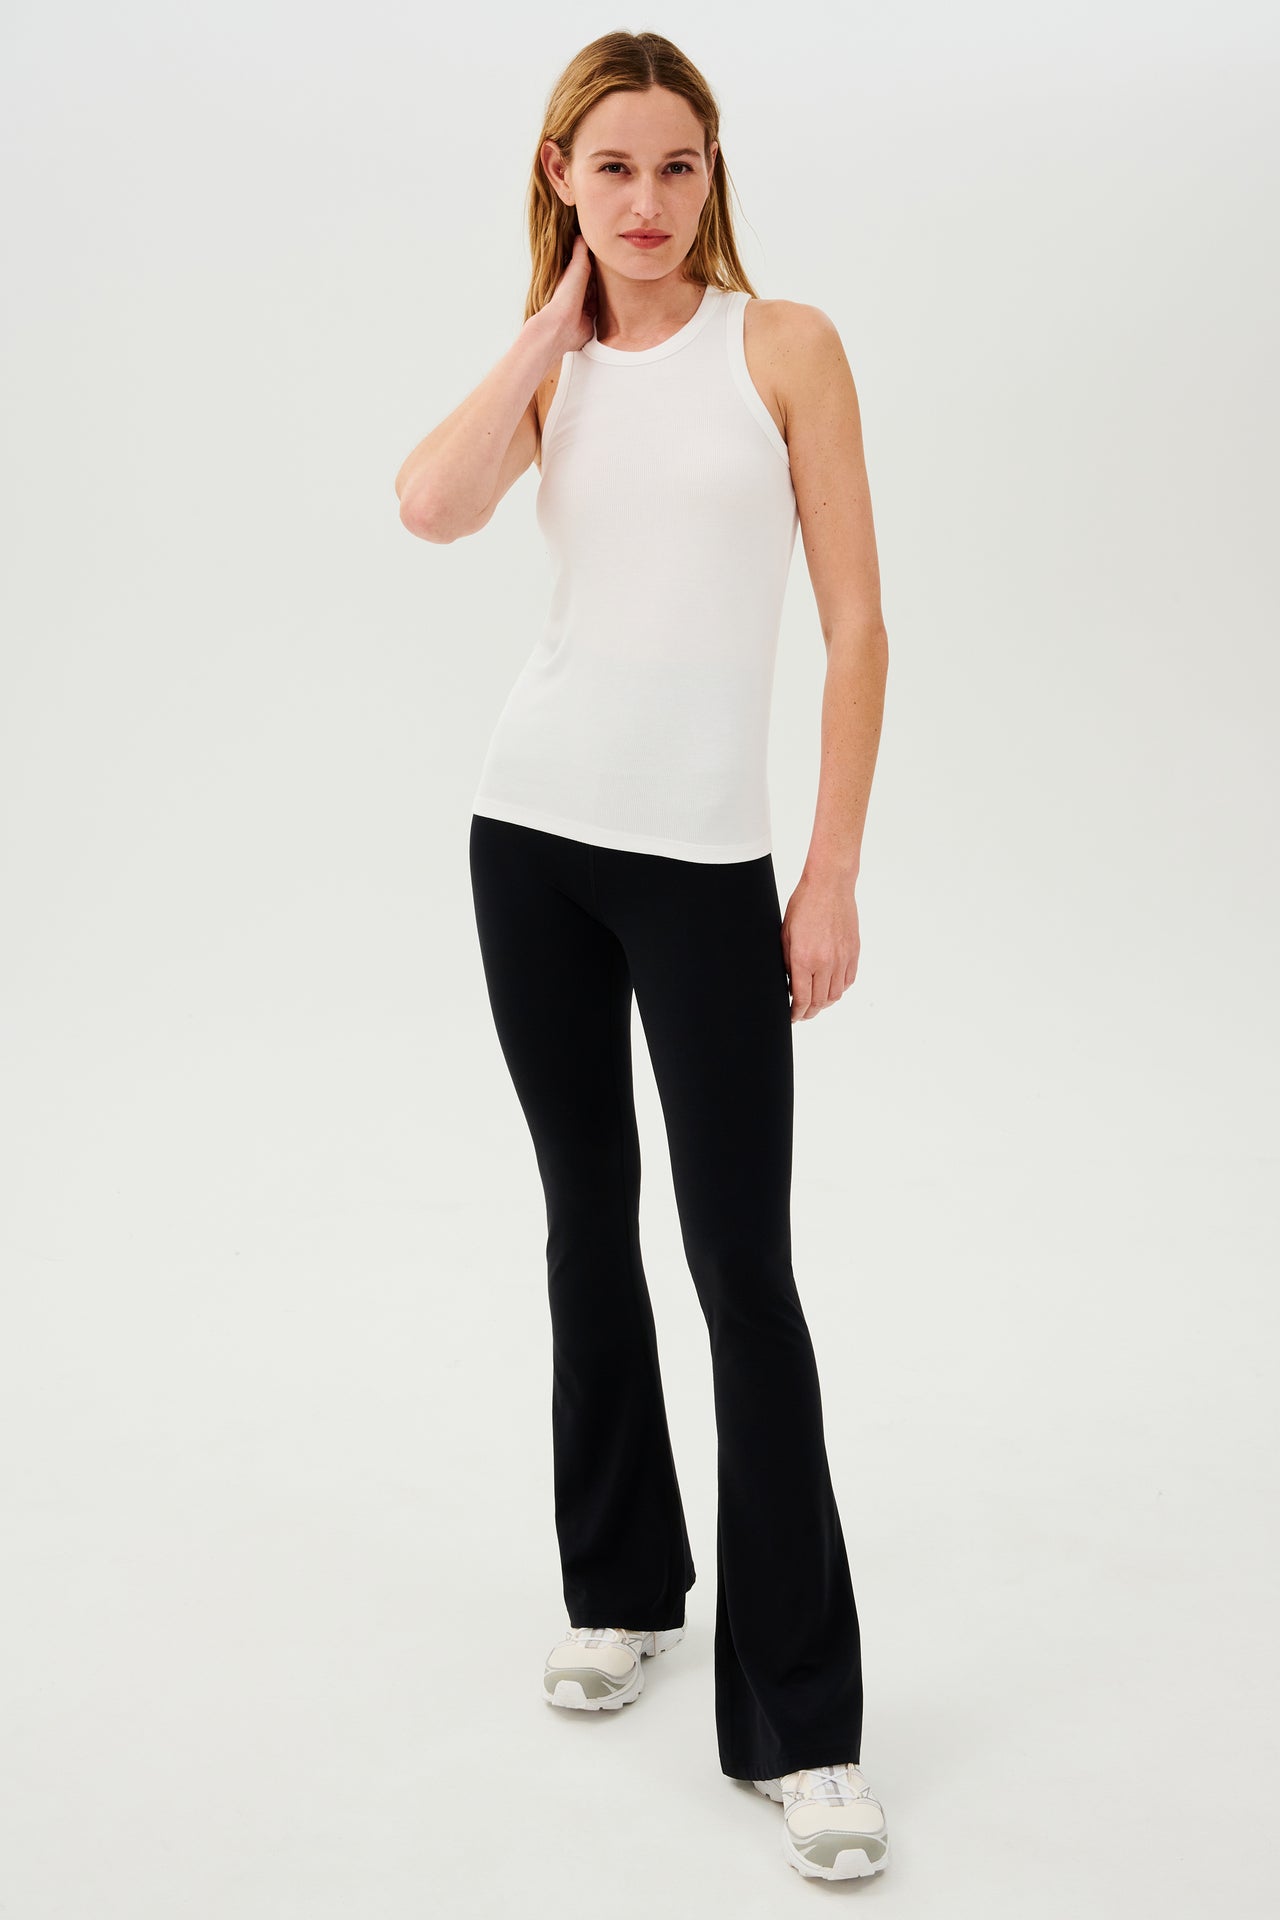 The model is wearing a SPLITS59 Kiki Rib Tank Full Length in White and black leggings, perfect for yoga or gym workouts.